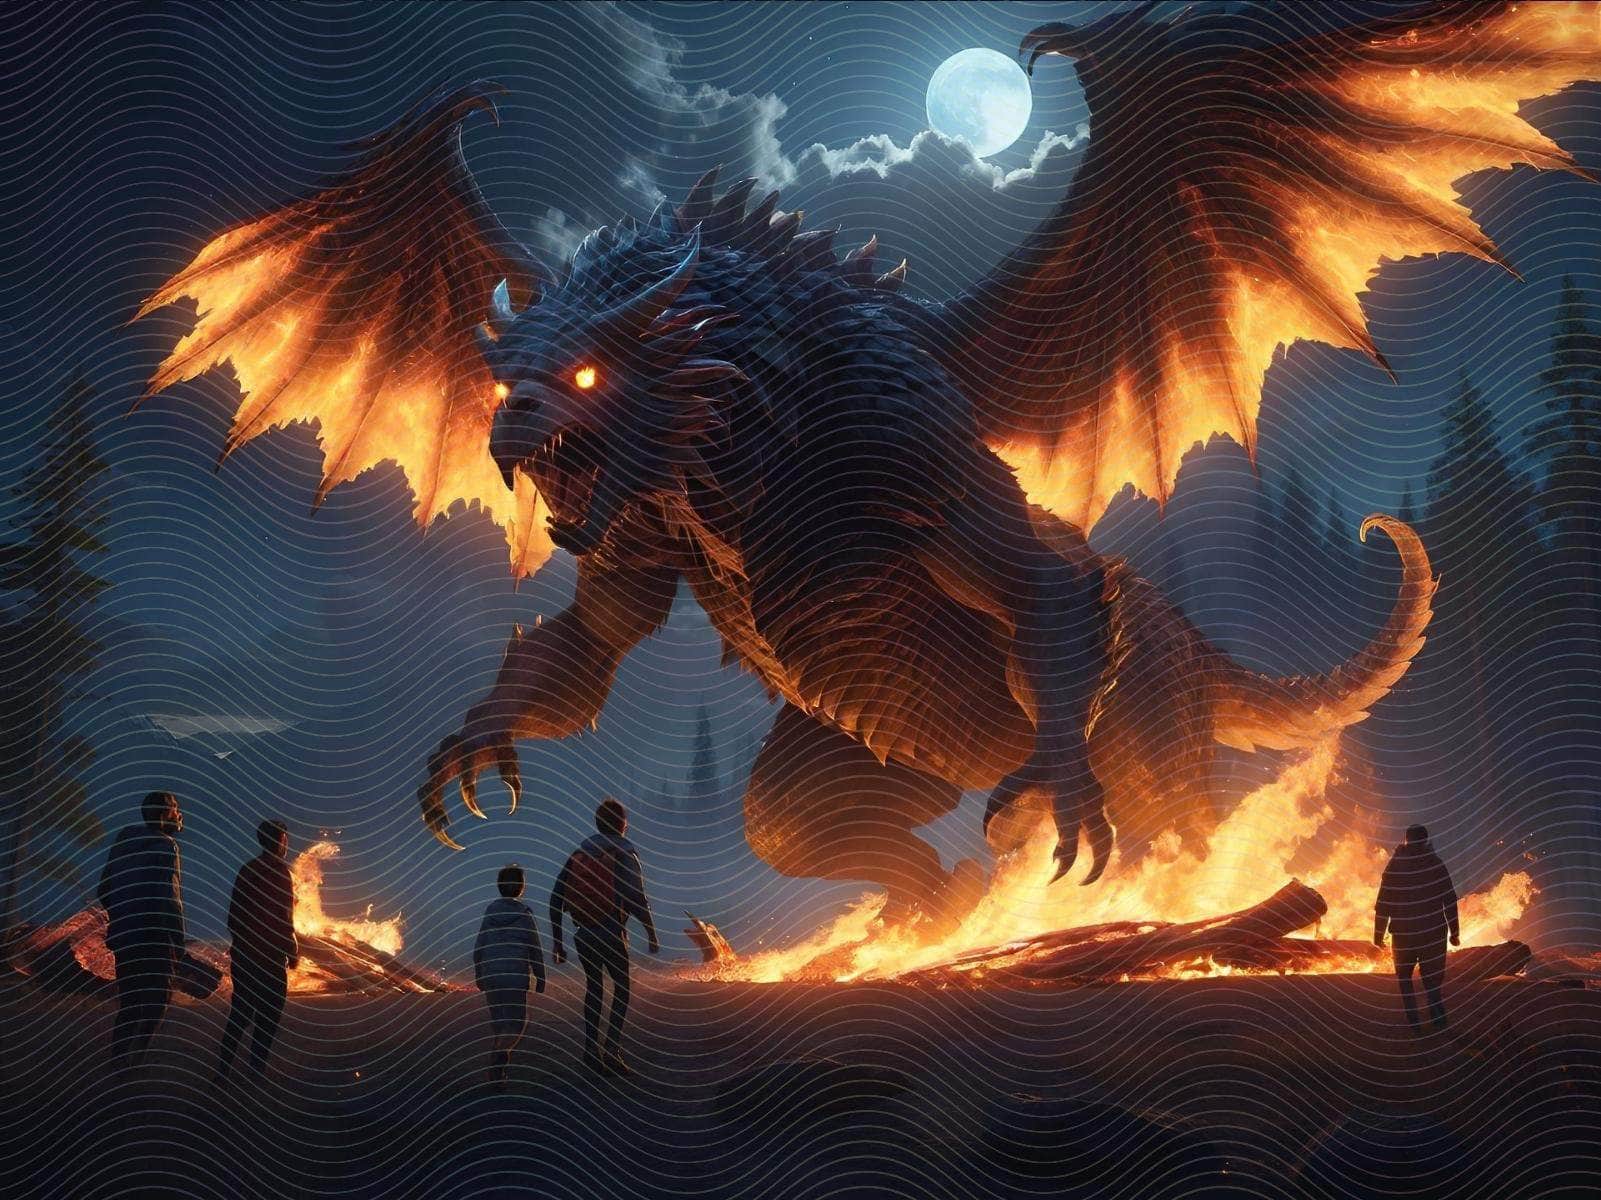 A Colossal Winged Beast Glistening in Fire Light